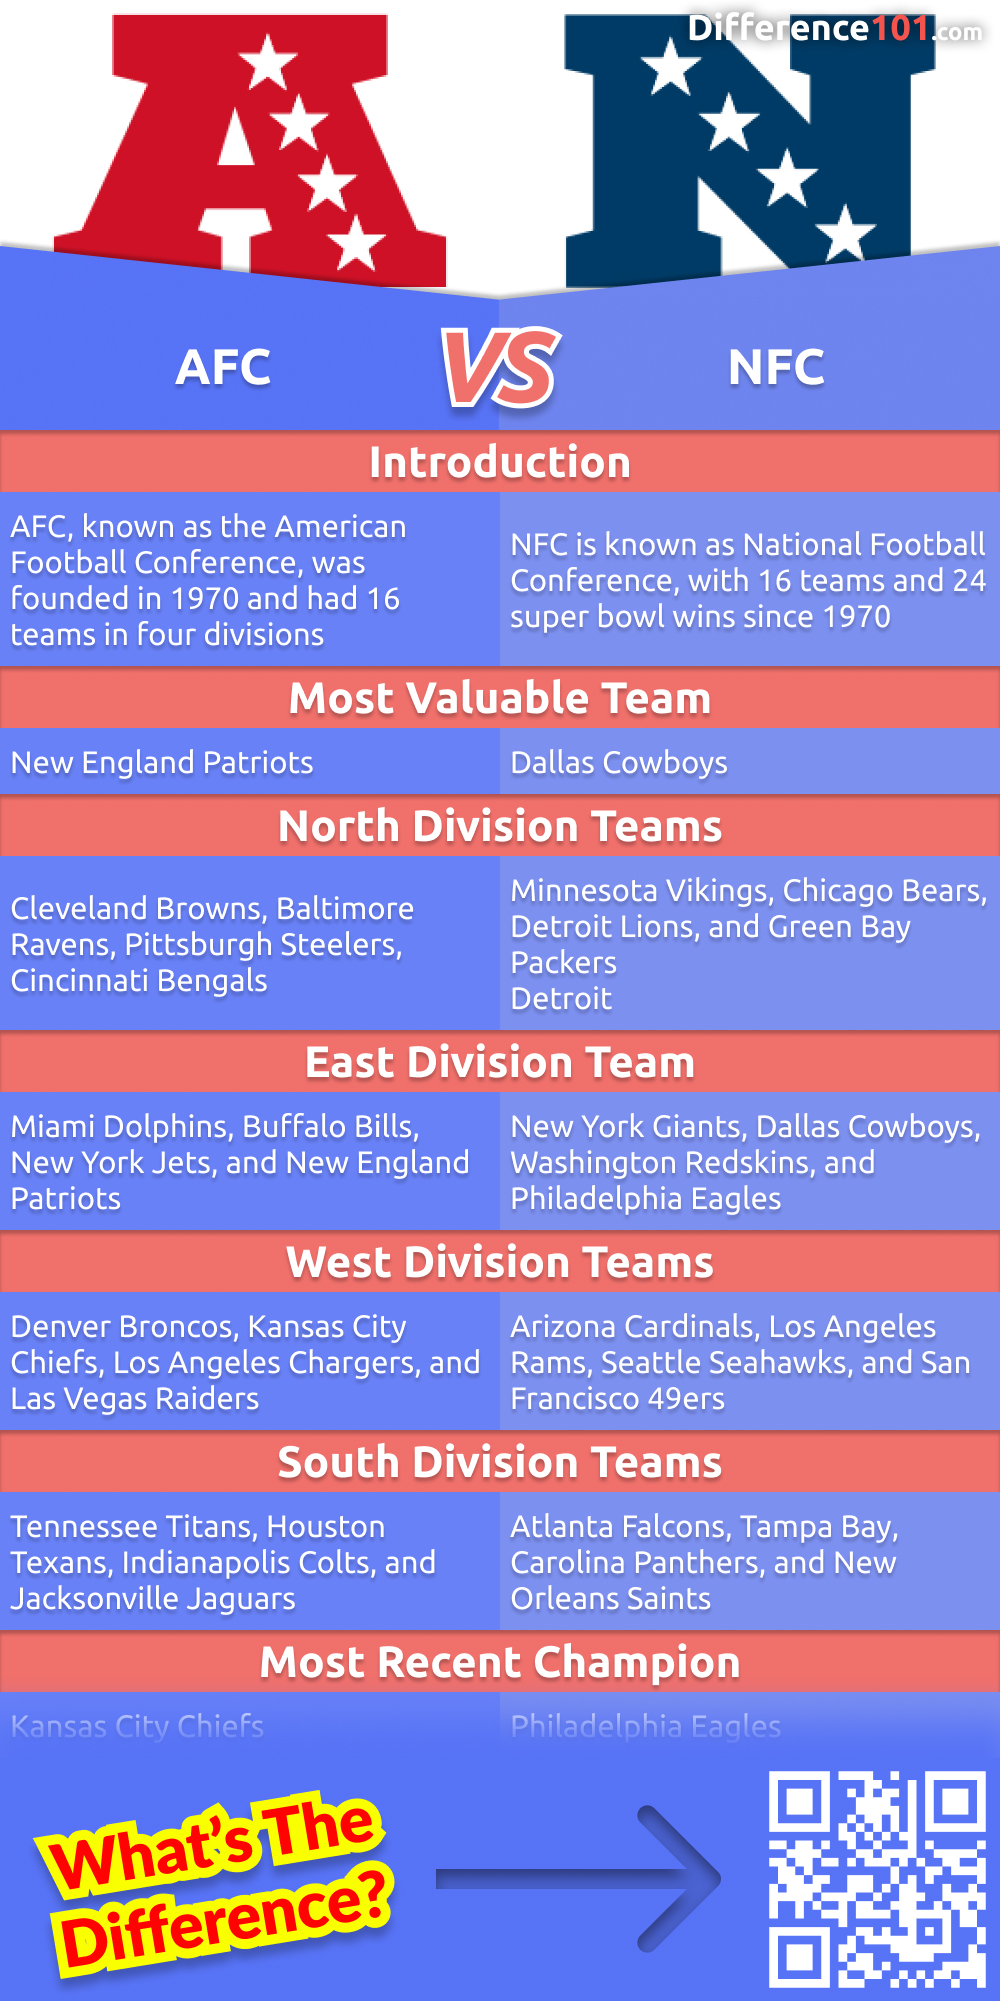 AFC and NFC are the two main professional American football leagues. They are both headquartered in New York City. Read more to find out their differences and which teams are in which conference